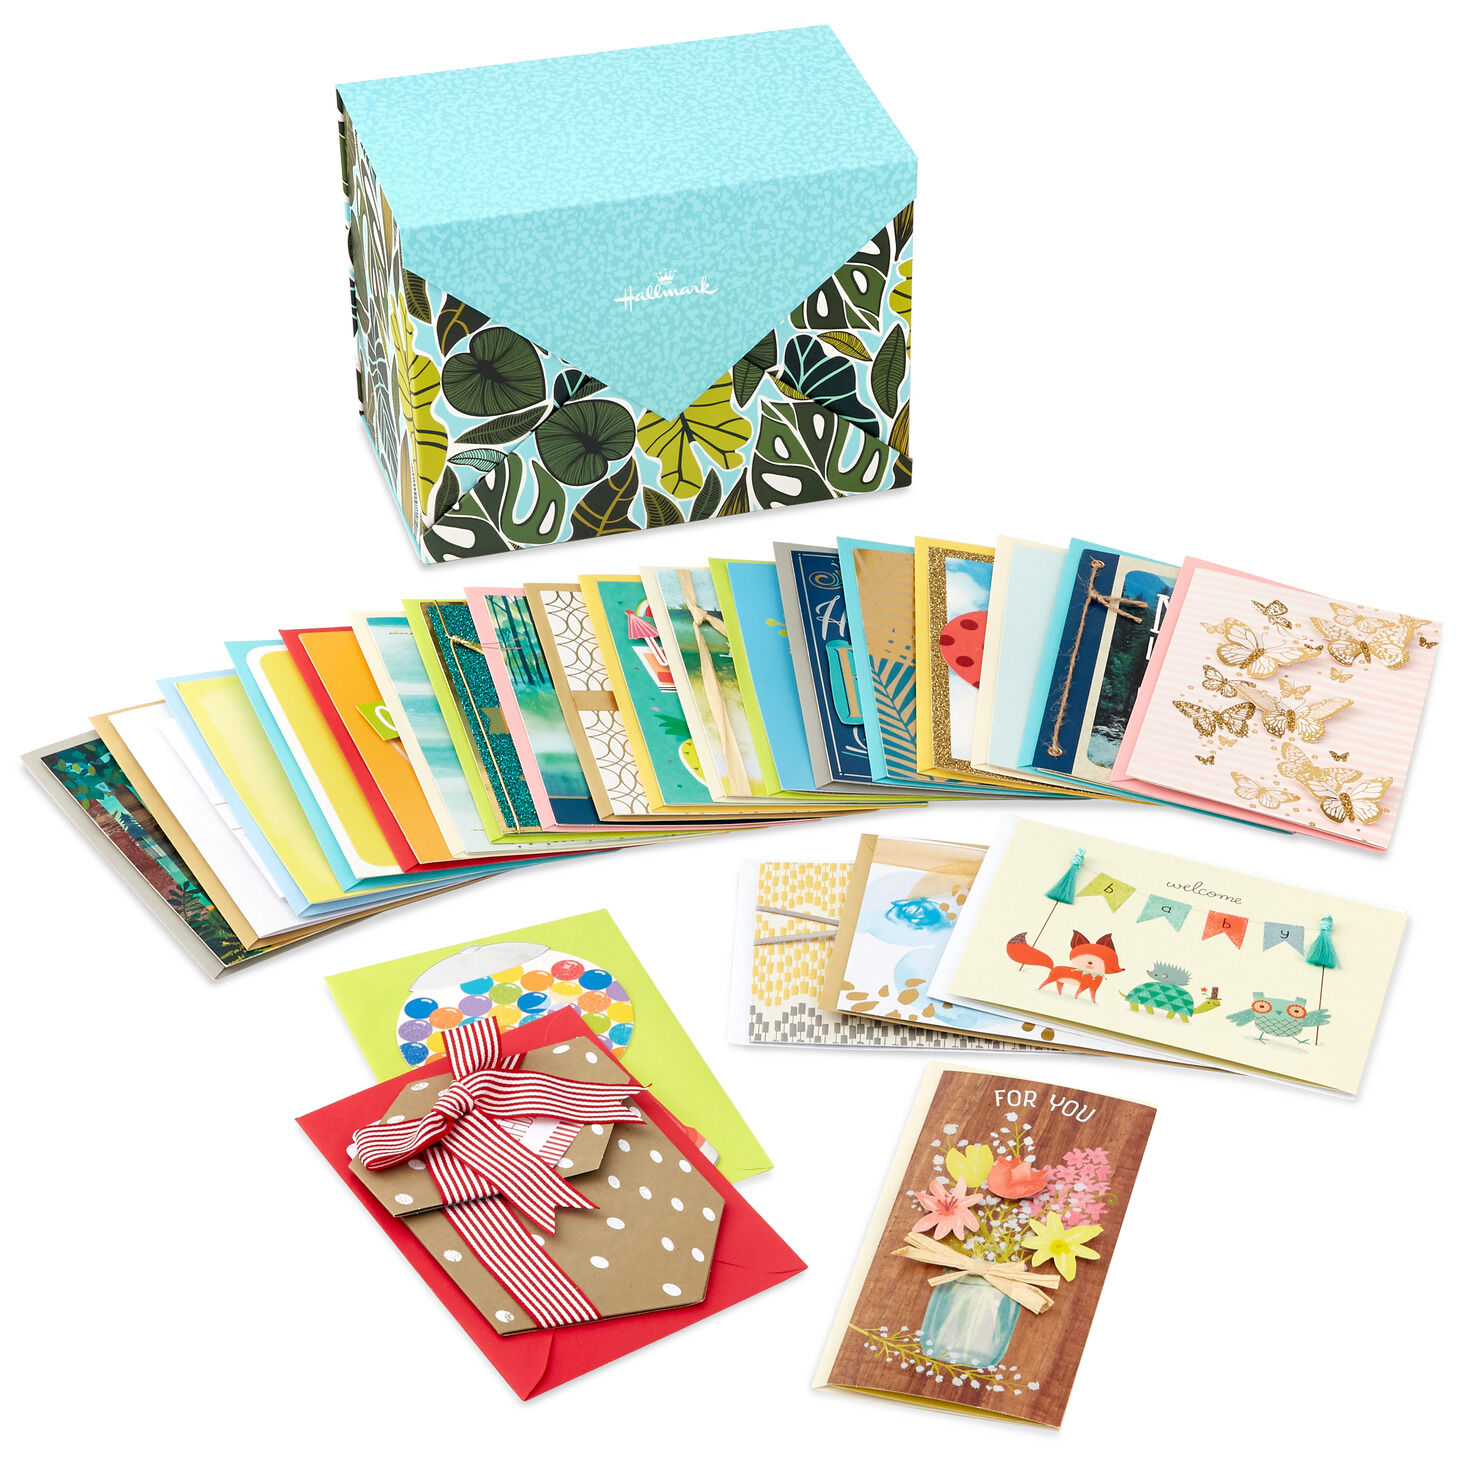 NEW SET of 12 HAND-MADE PAPER BLANK NOTE CARDS and ENVELOPES in BOX